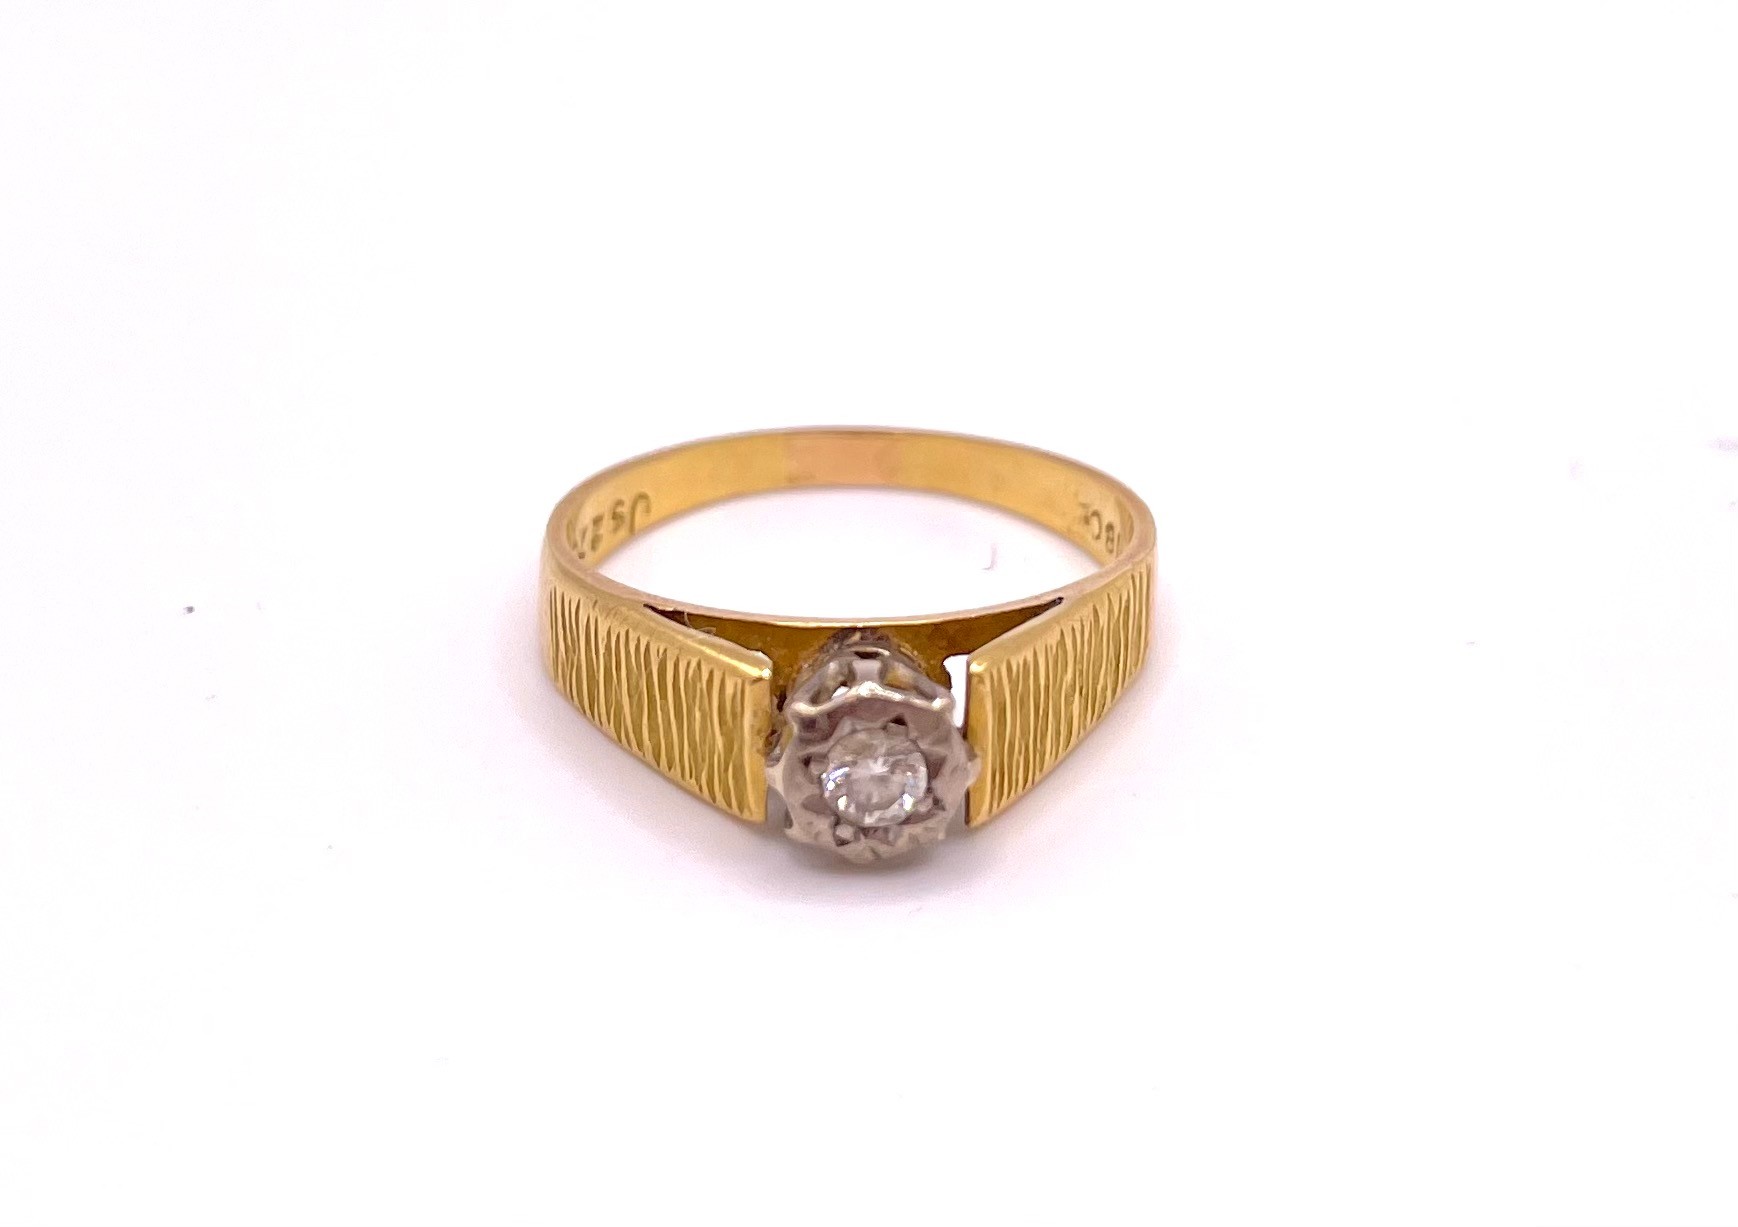 A mid to late 20th century 18ct yellow gold and diamond ring, illusion-set with a small round